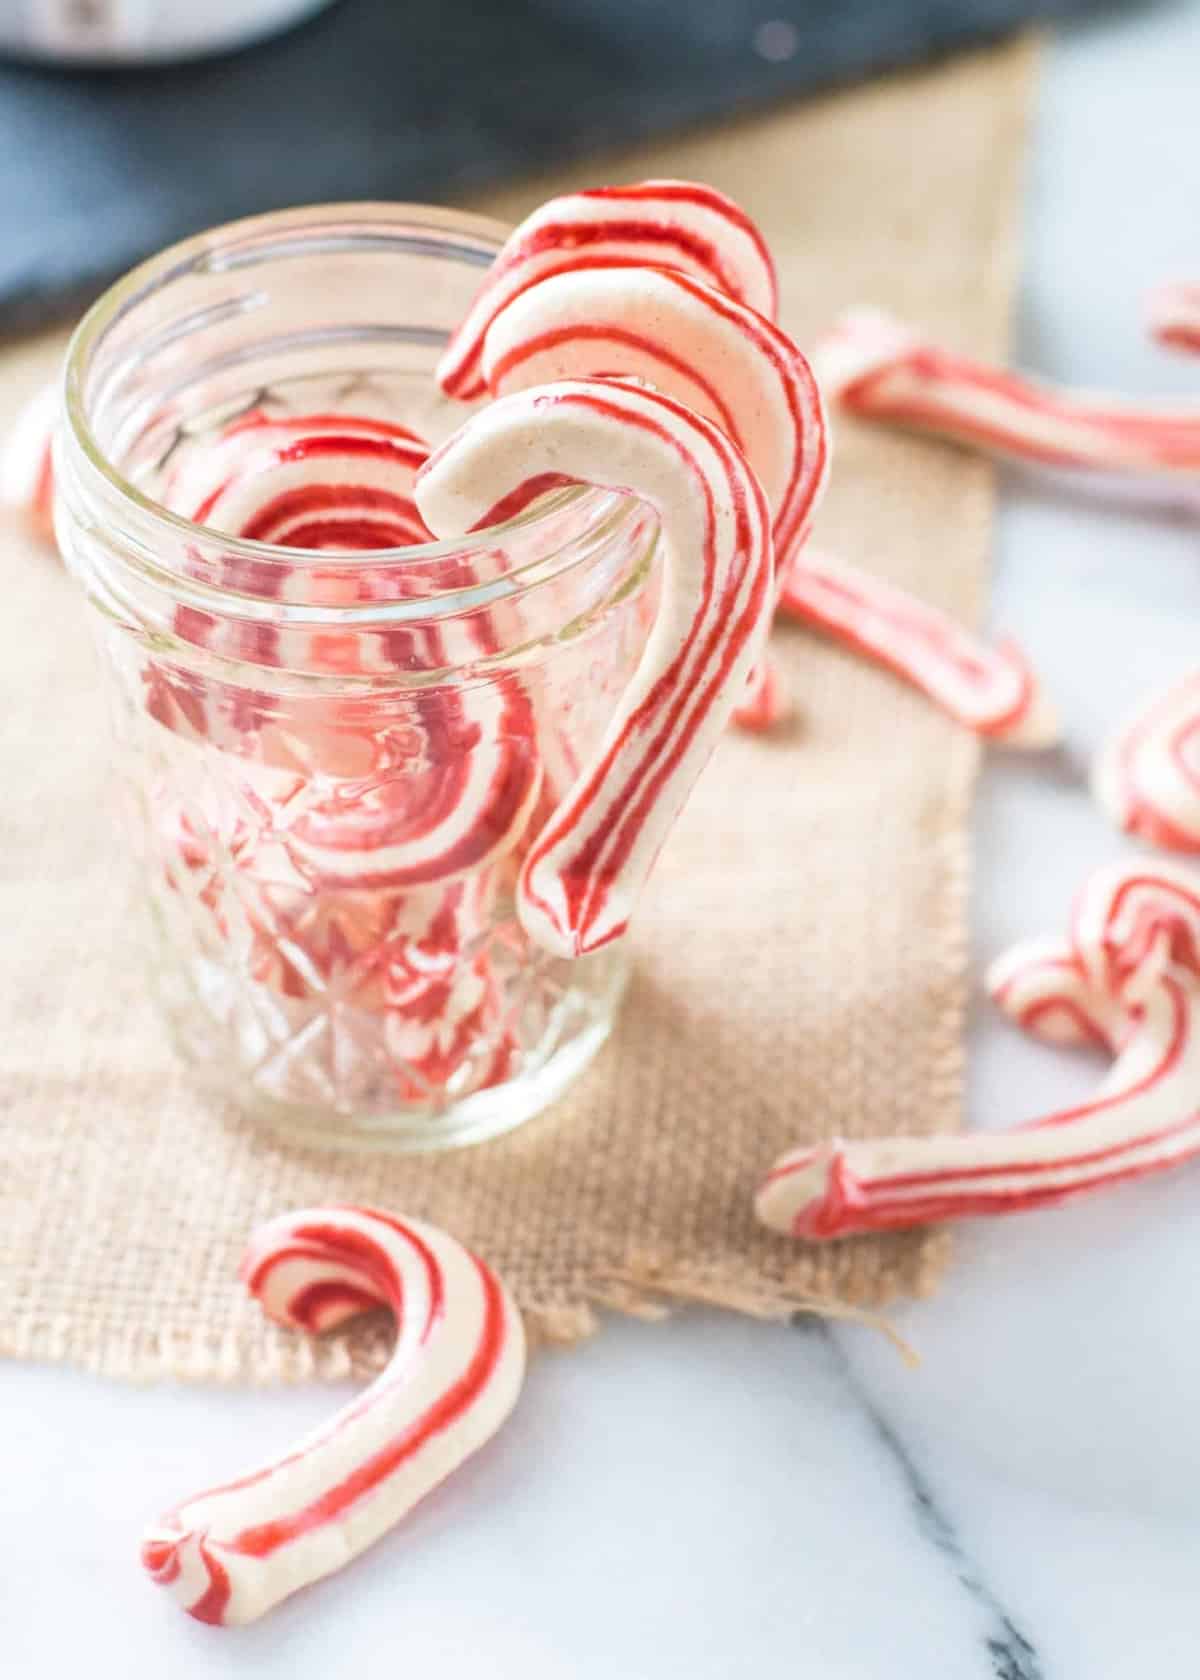 candy cane meringues in a glass jar